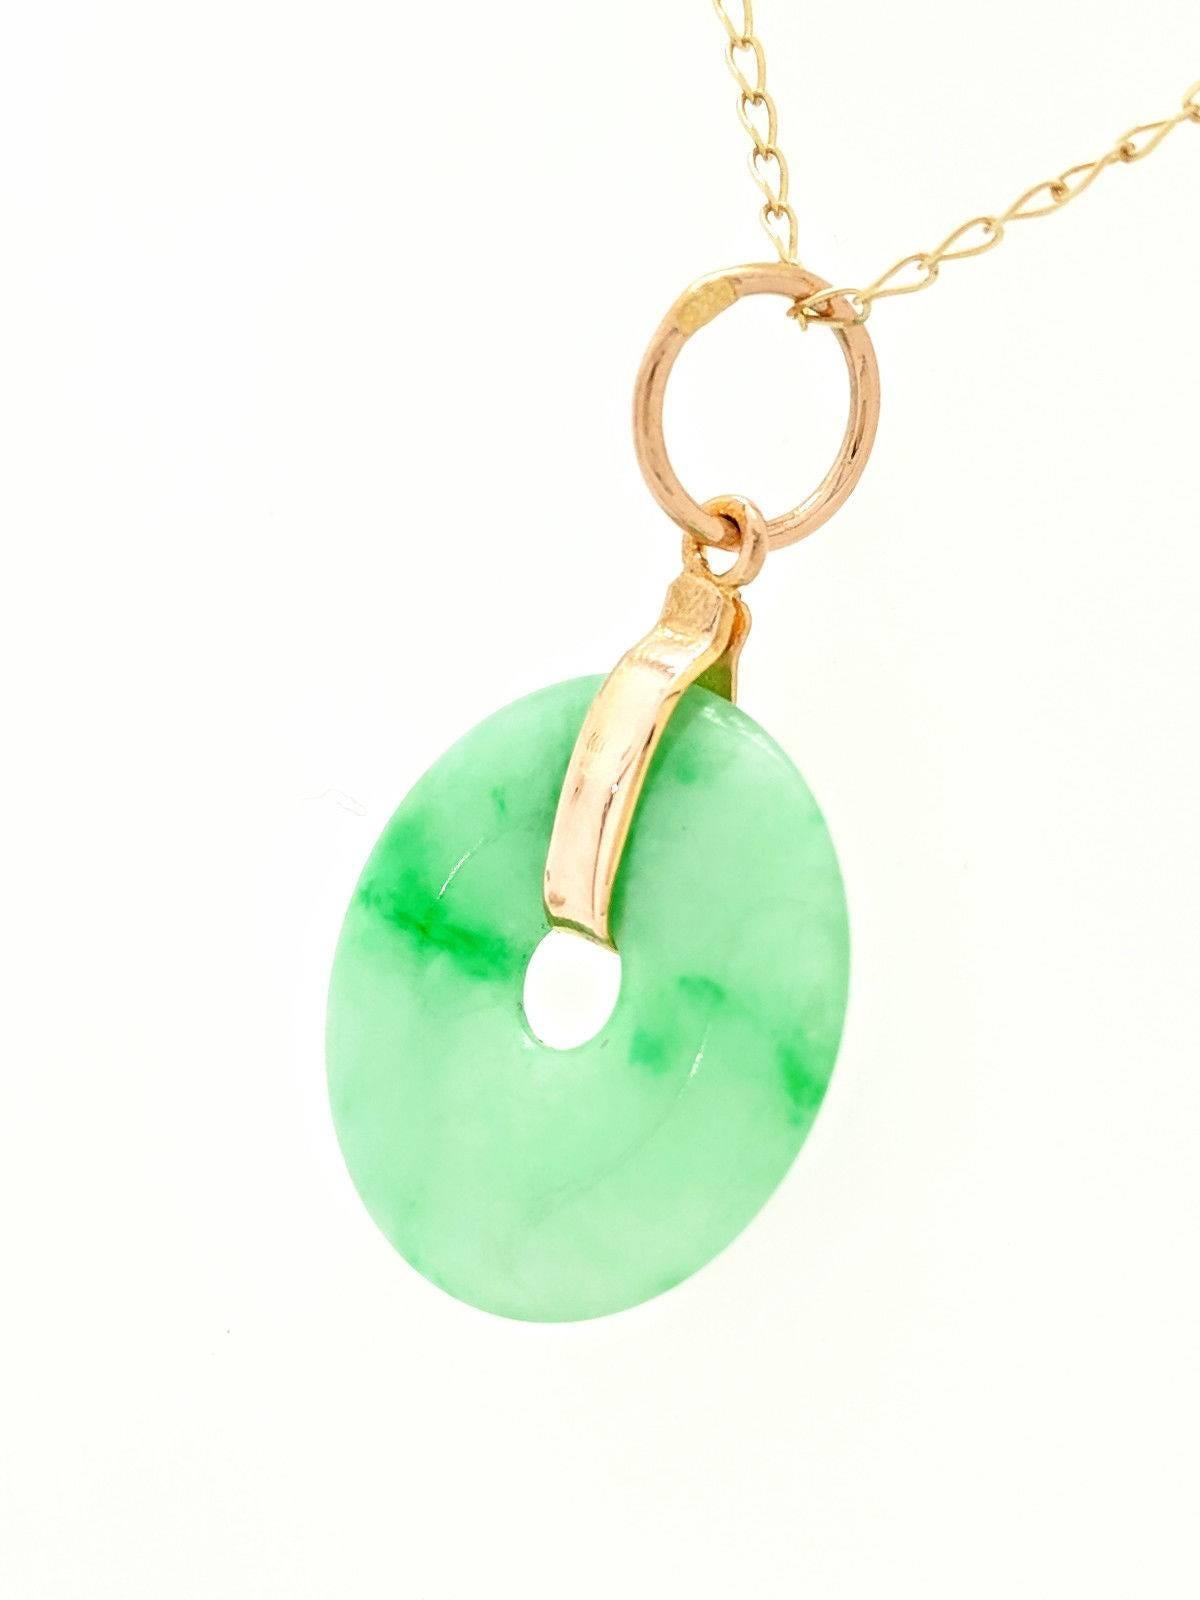 Ladies 20k Yellow Gold Green Jade Pendant Necklace 2.8 Grams

You are viewing a Beautiful Green Jade Pendant Necklace. The pendant is crafted from 20k yellow gold and the necklace is crafted from 14k yellow gold. It weighs 1.7 grams and the pendant